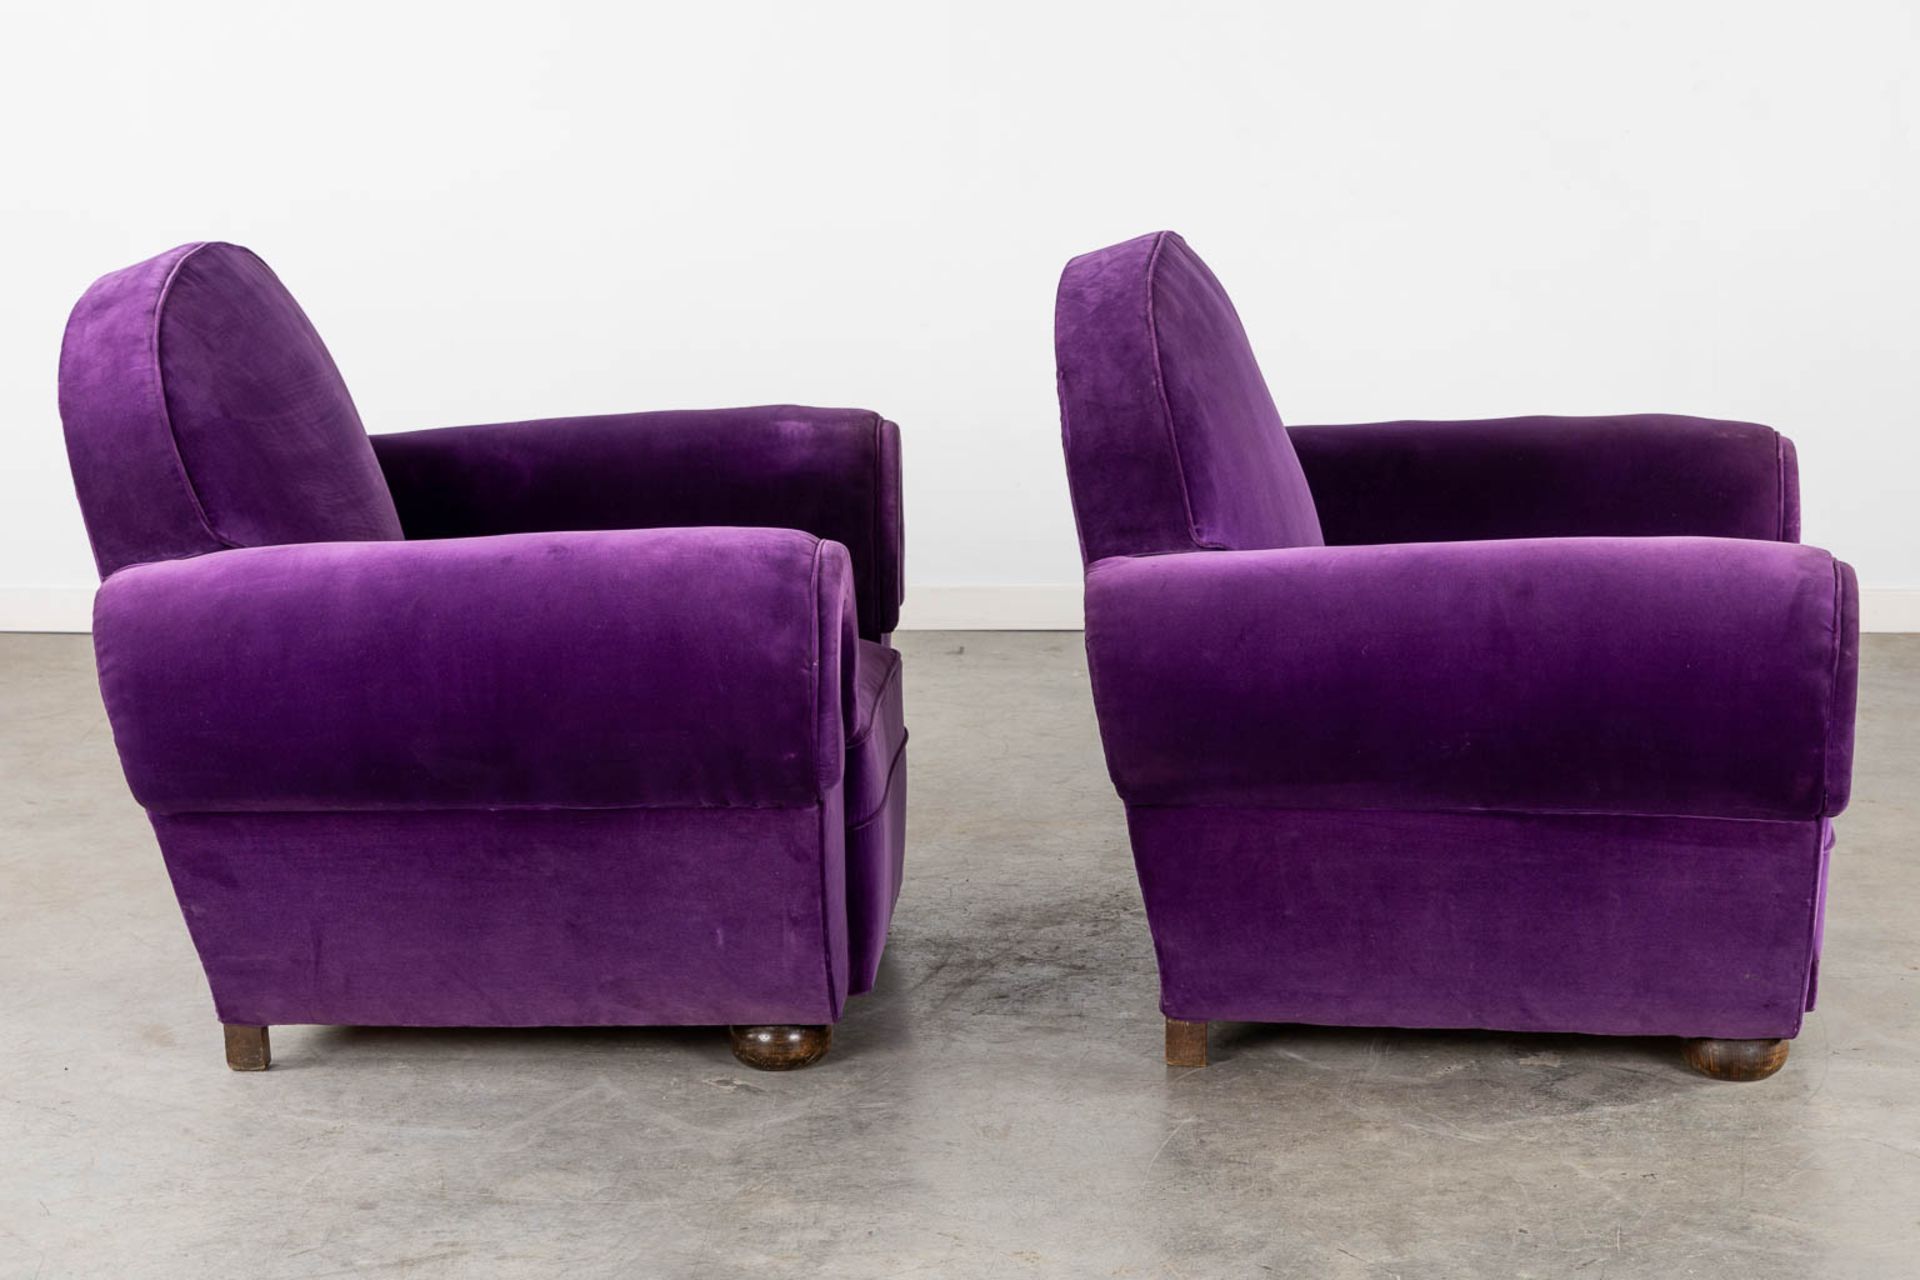 A pair of armchairs with purple fabric upholstry, France, Art Deco. (L:84 x W:109 x H:87 cm) - Image 6 of 10